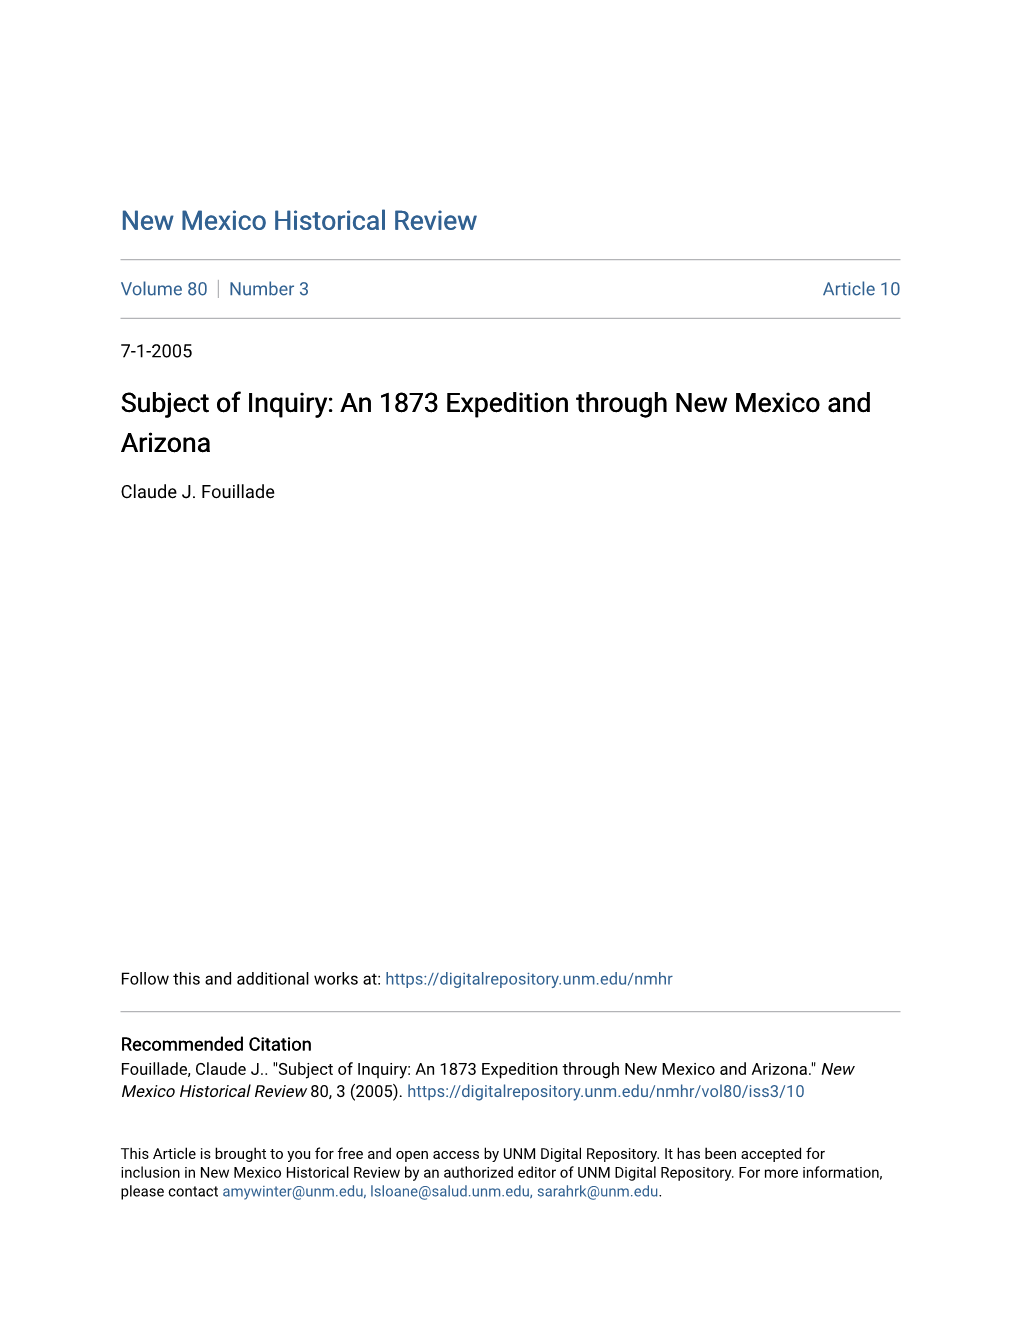 Subject of Inquiry: an 1873 Expedition Through New Mexico and Arizona